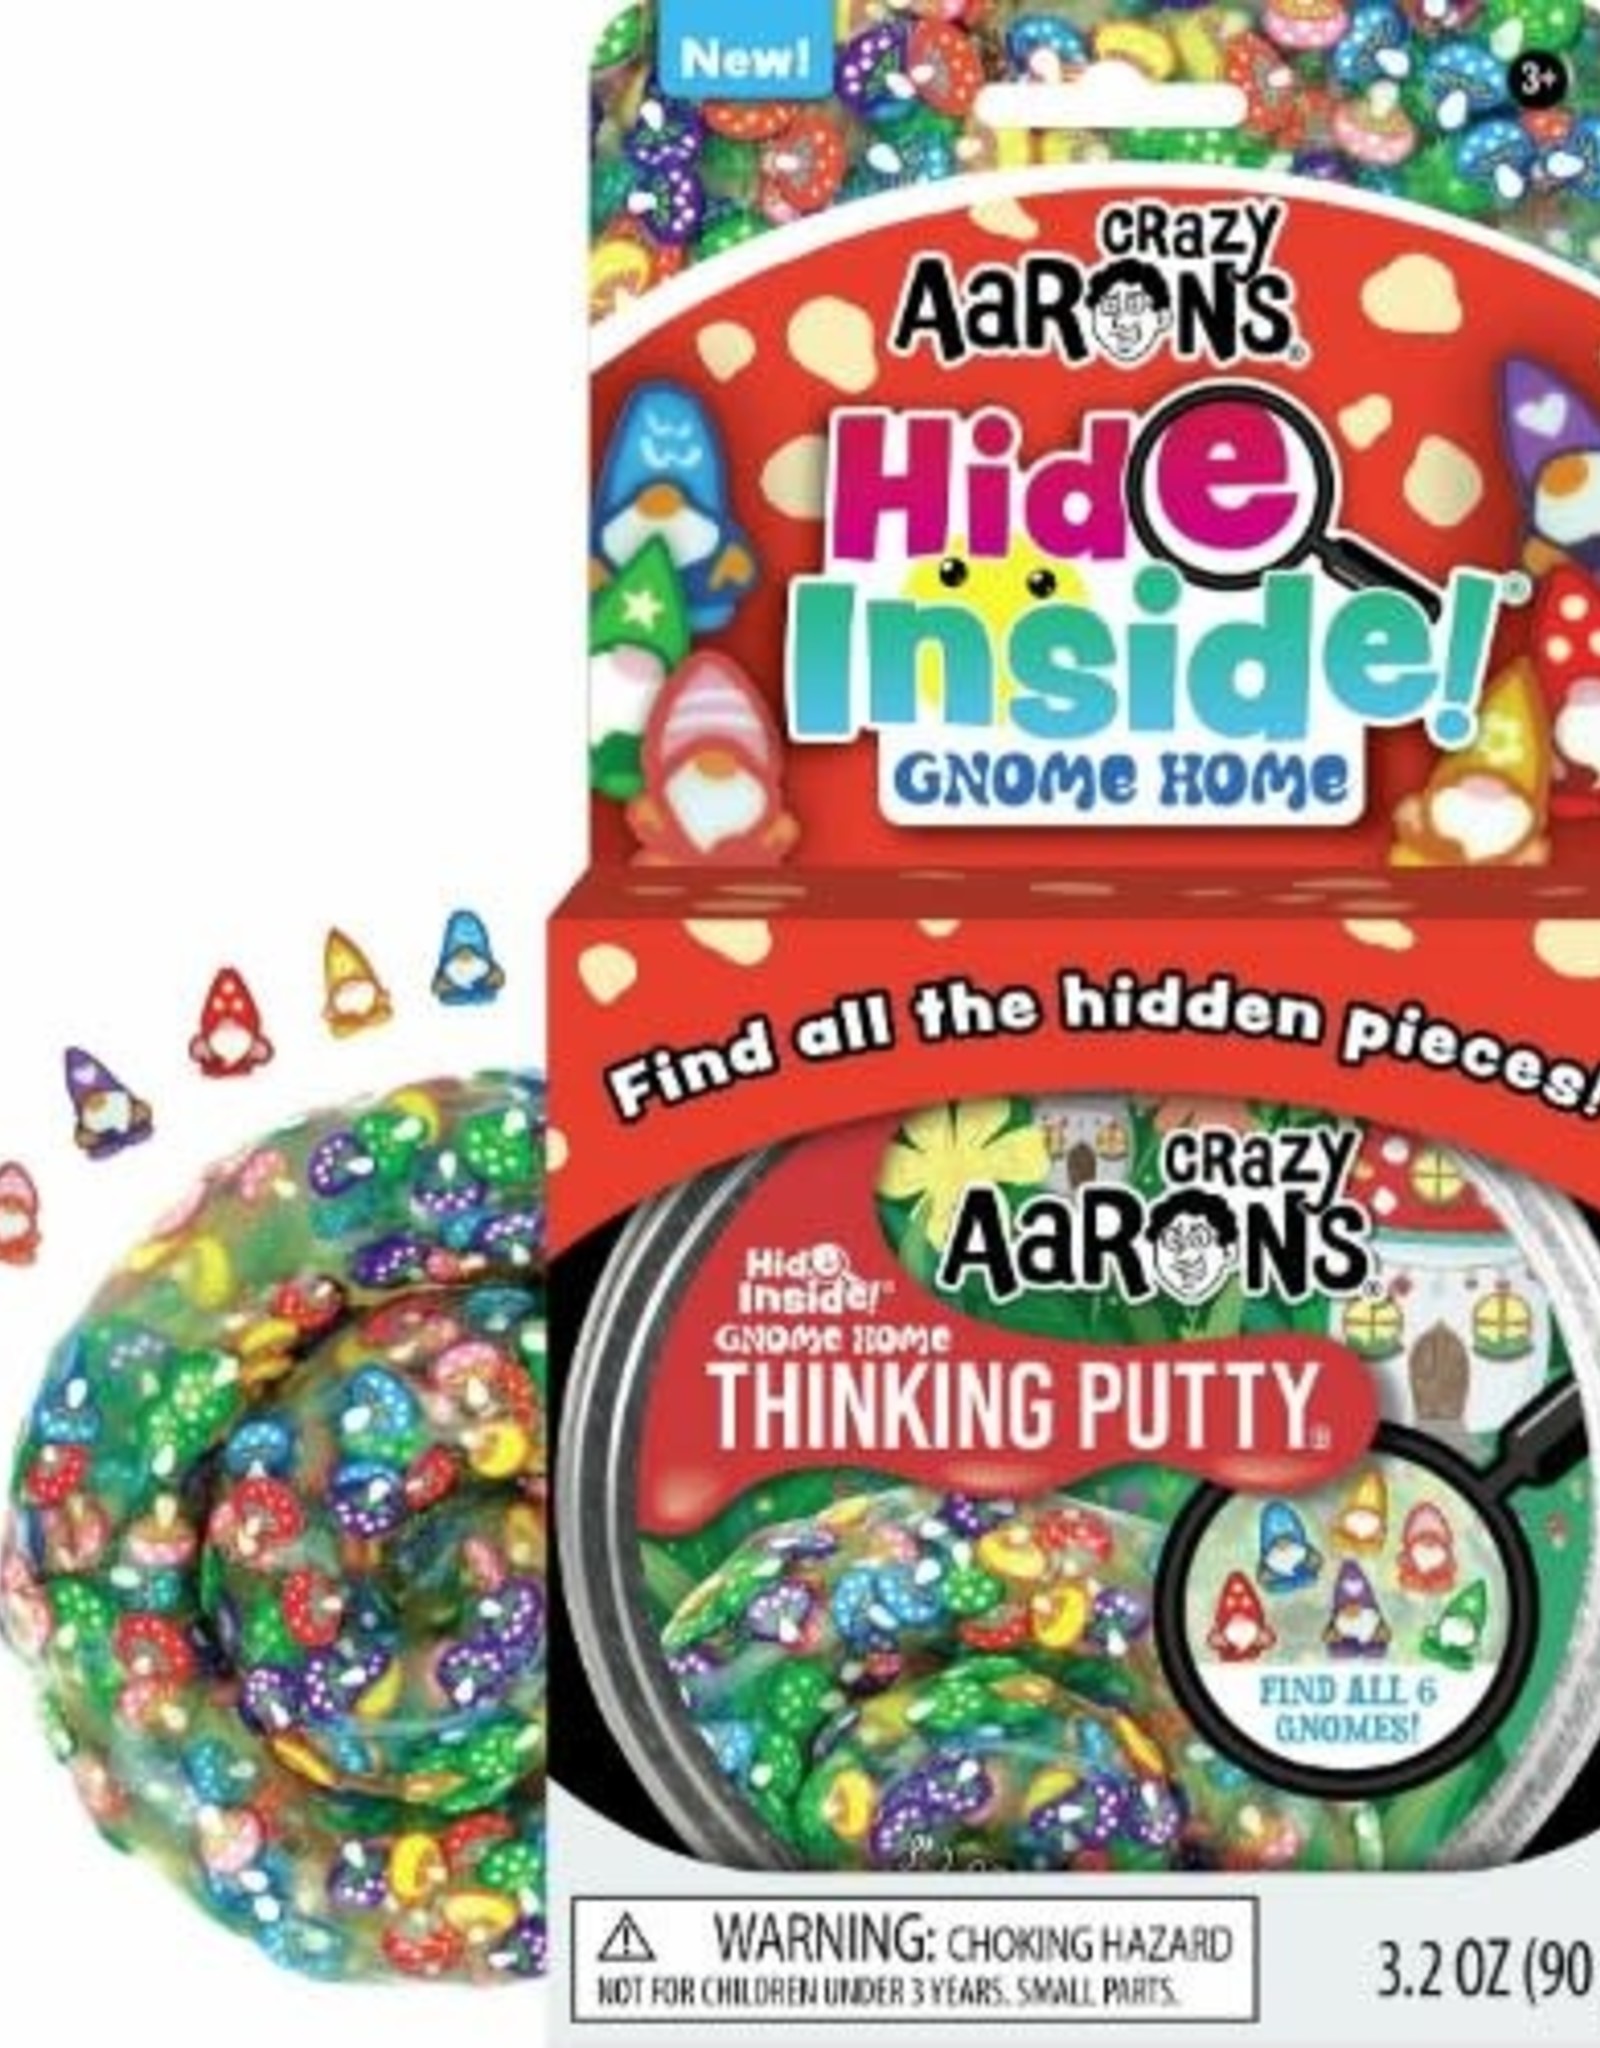 Crazy Aaron's Thinking Putty Crazy Aaron's 4" Tin - Hide Inside - Gnome Home